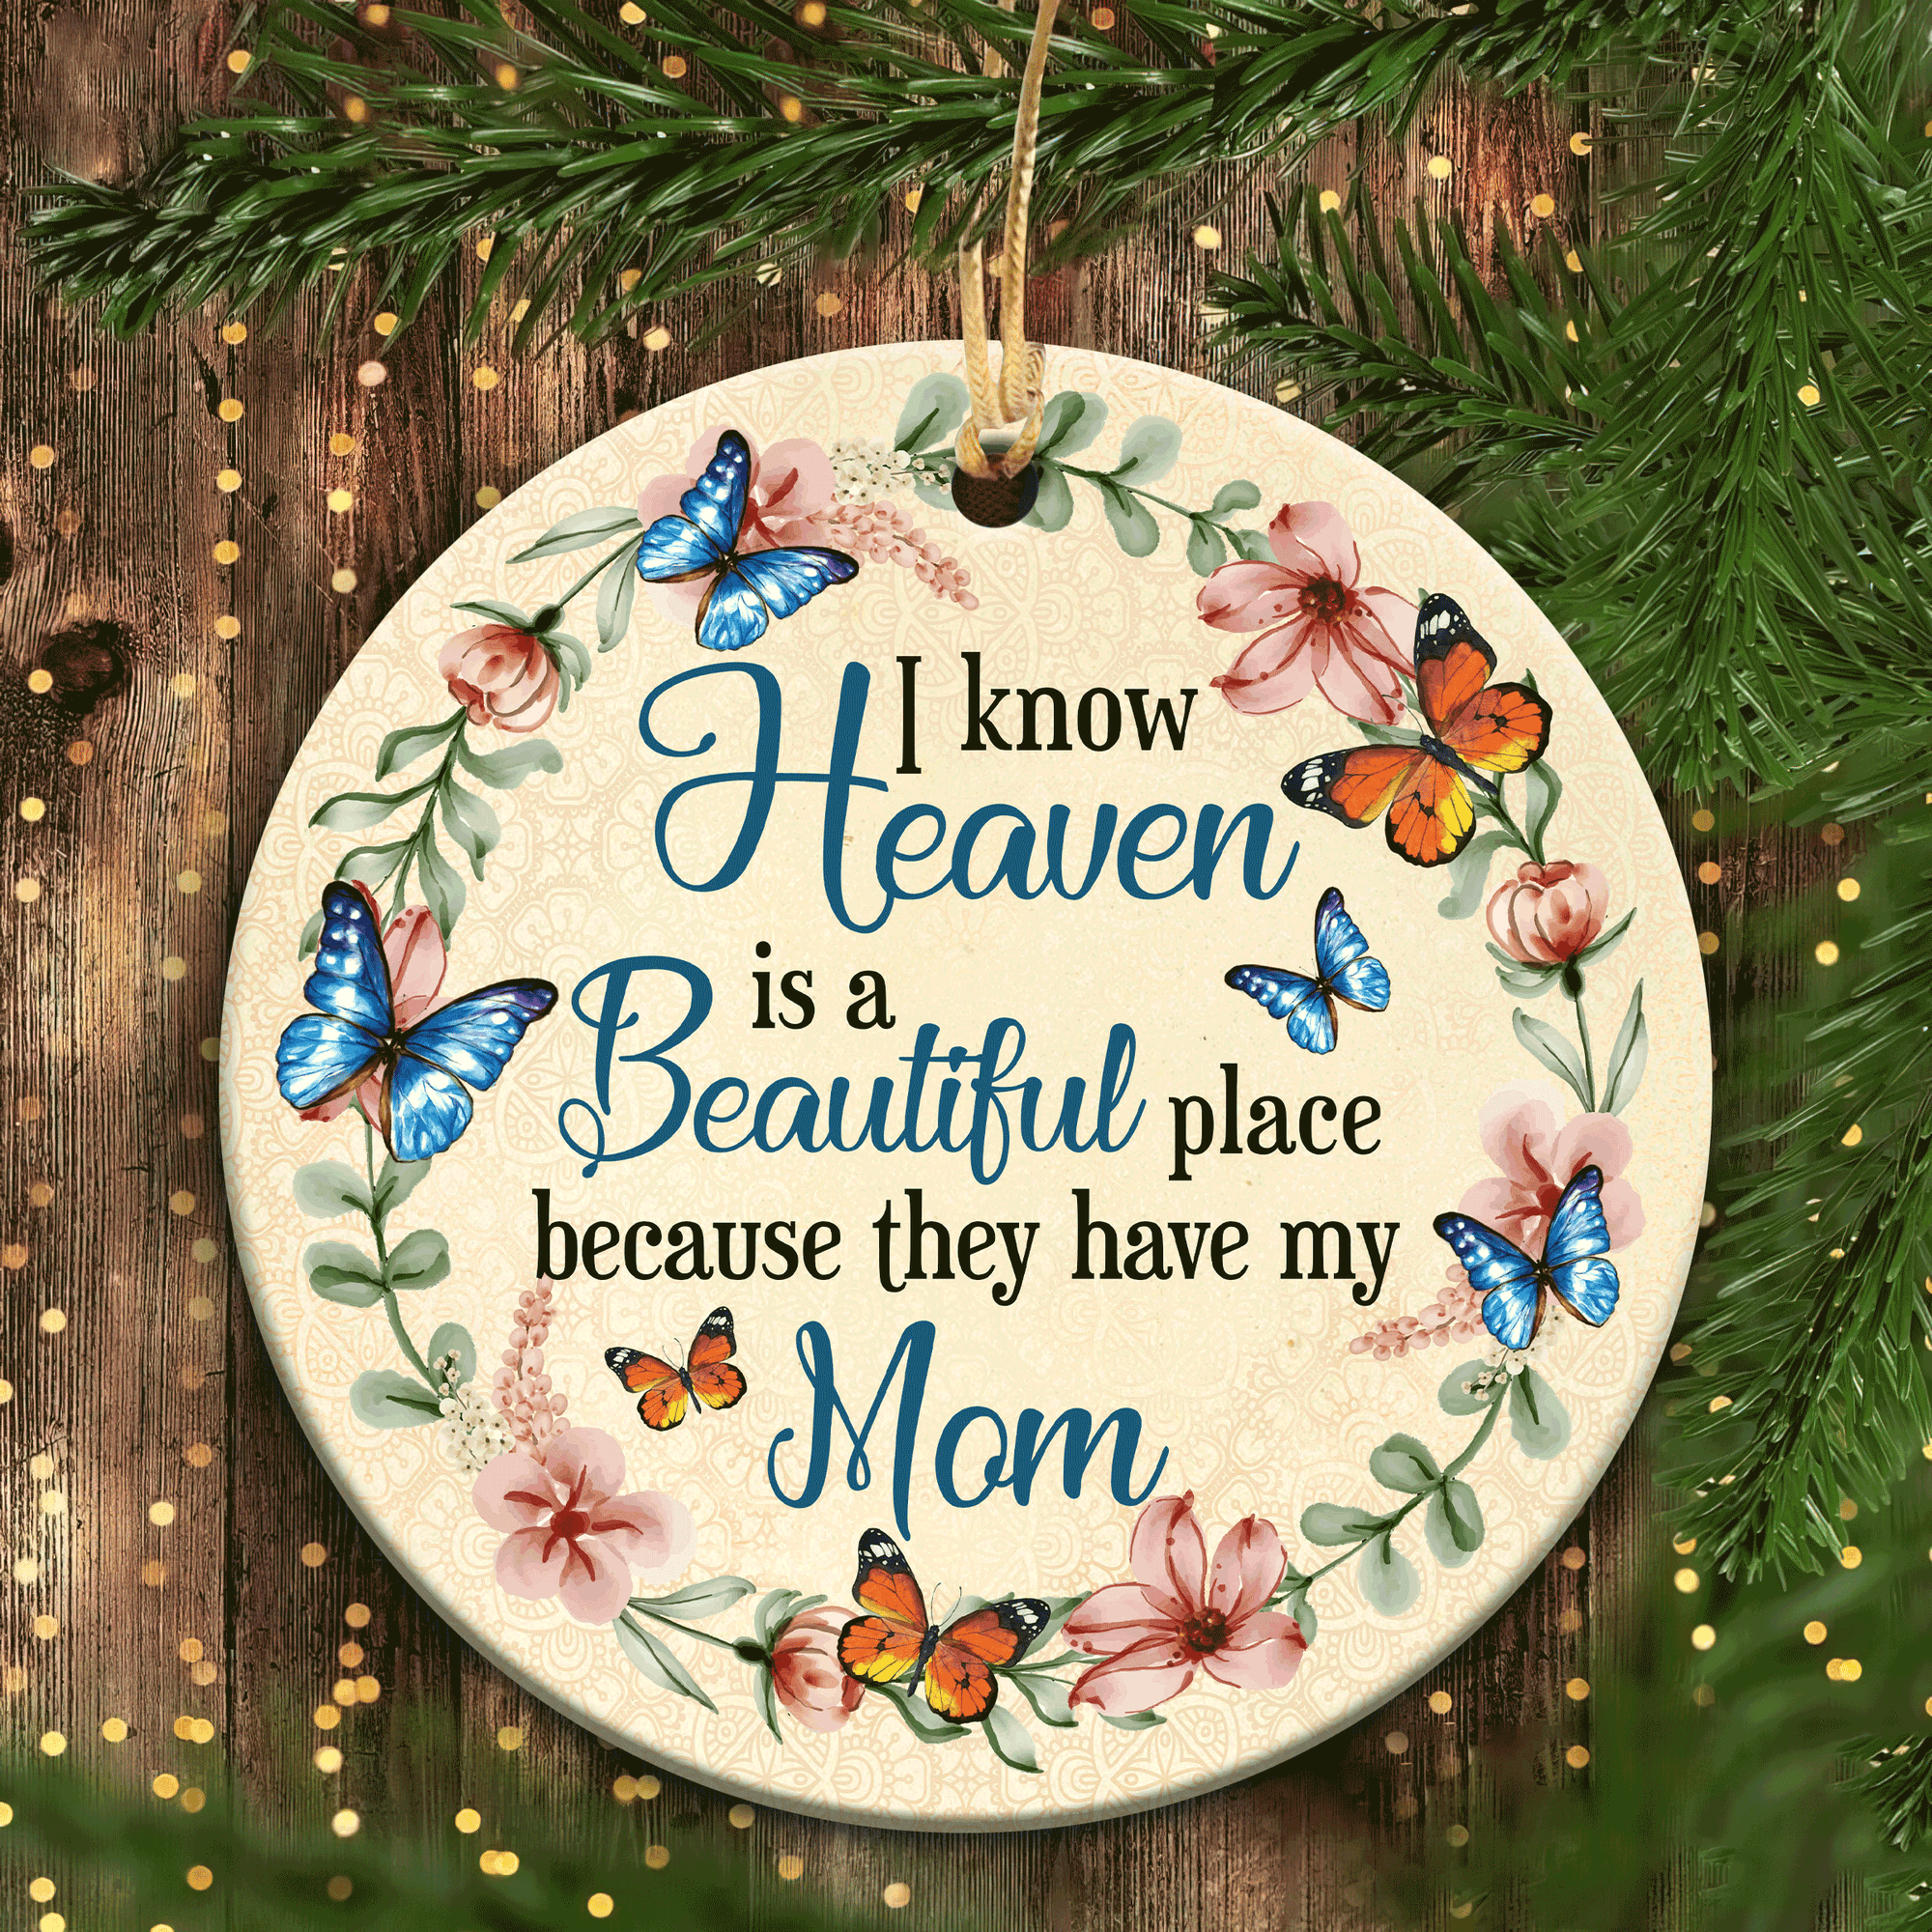 Meaningful Gifts For Loss Of Mom, Memorial Ceramic Ornaments - Know Heaven Is A Beautiful Place Because They Have My Mom